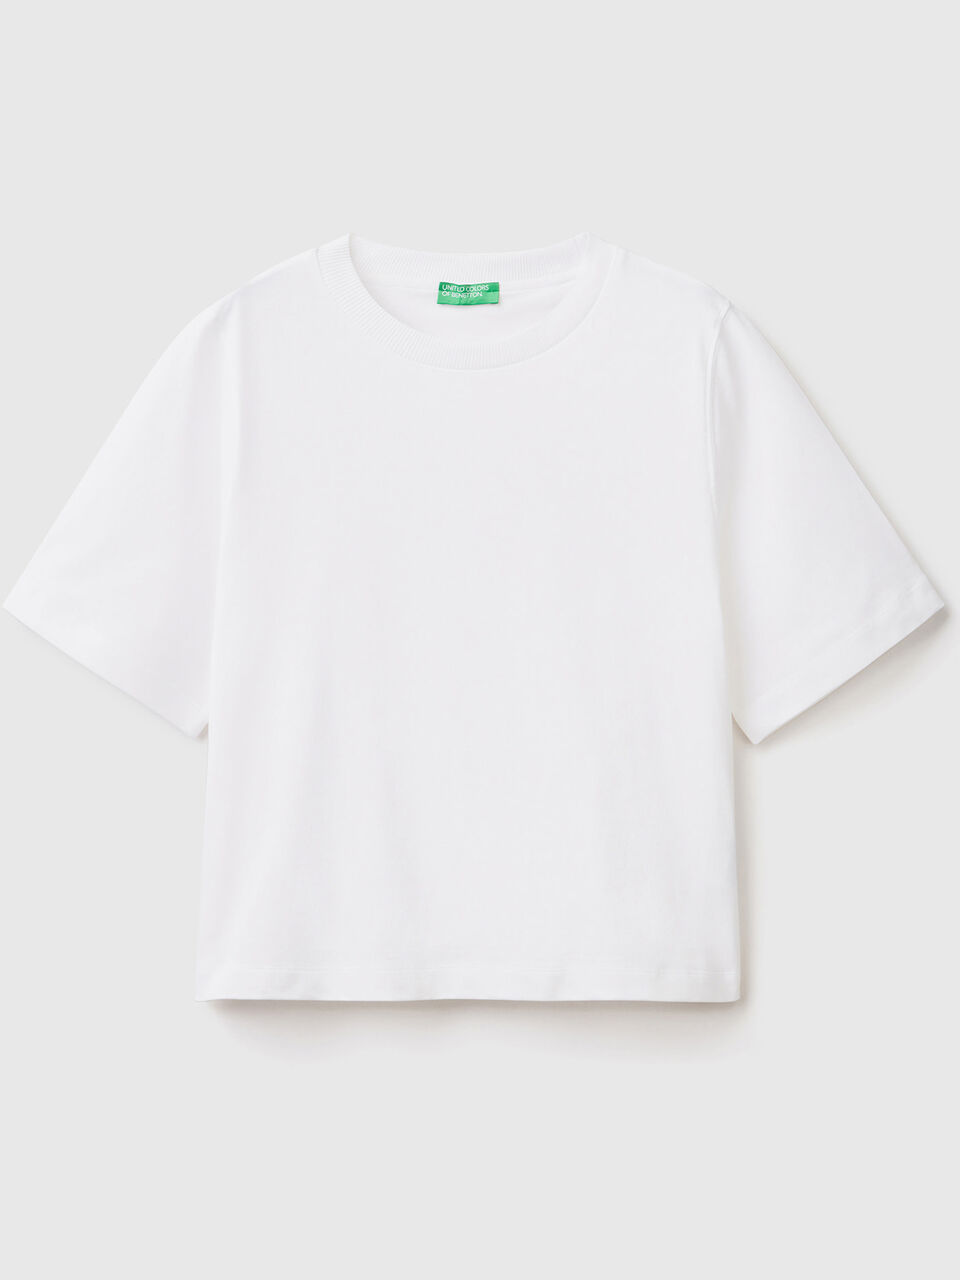  Y·J Back home Unisex Girls Boys Solid White 100% Cotton  Crewneck Tee Tshirt(2-11 Years) 6T 7T: Clothing, Shoes & Jewelry